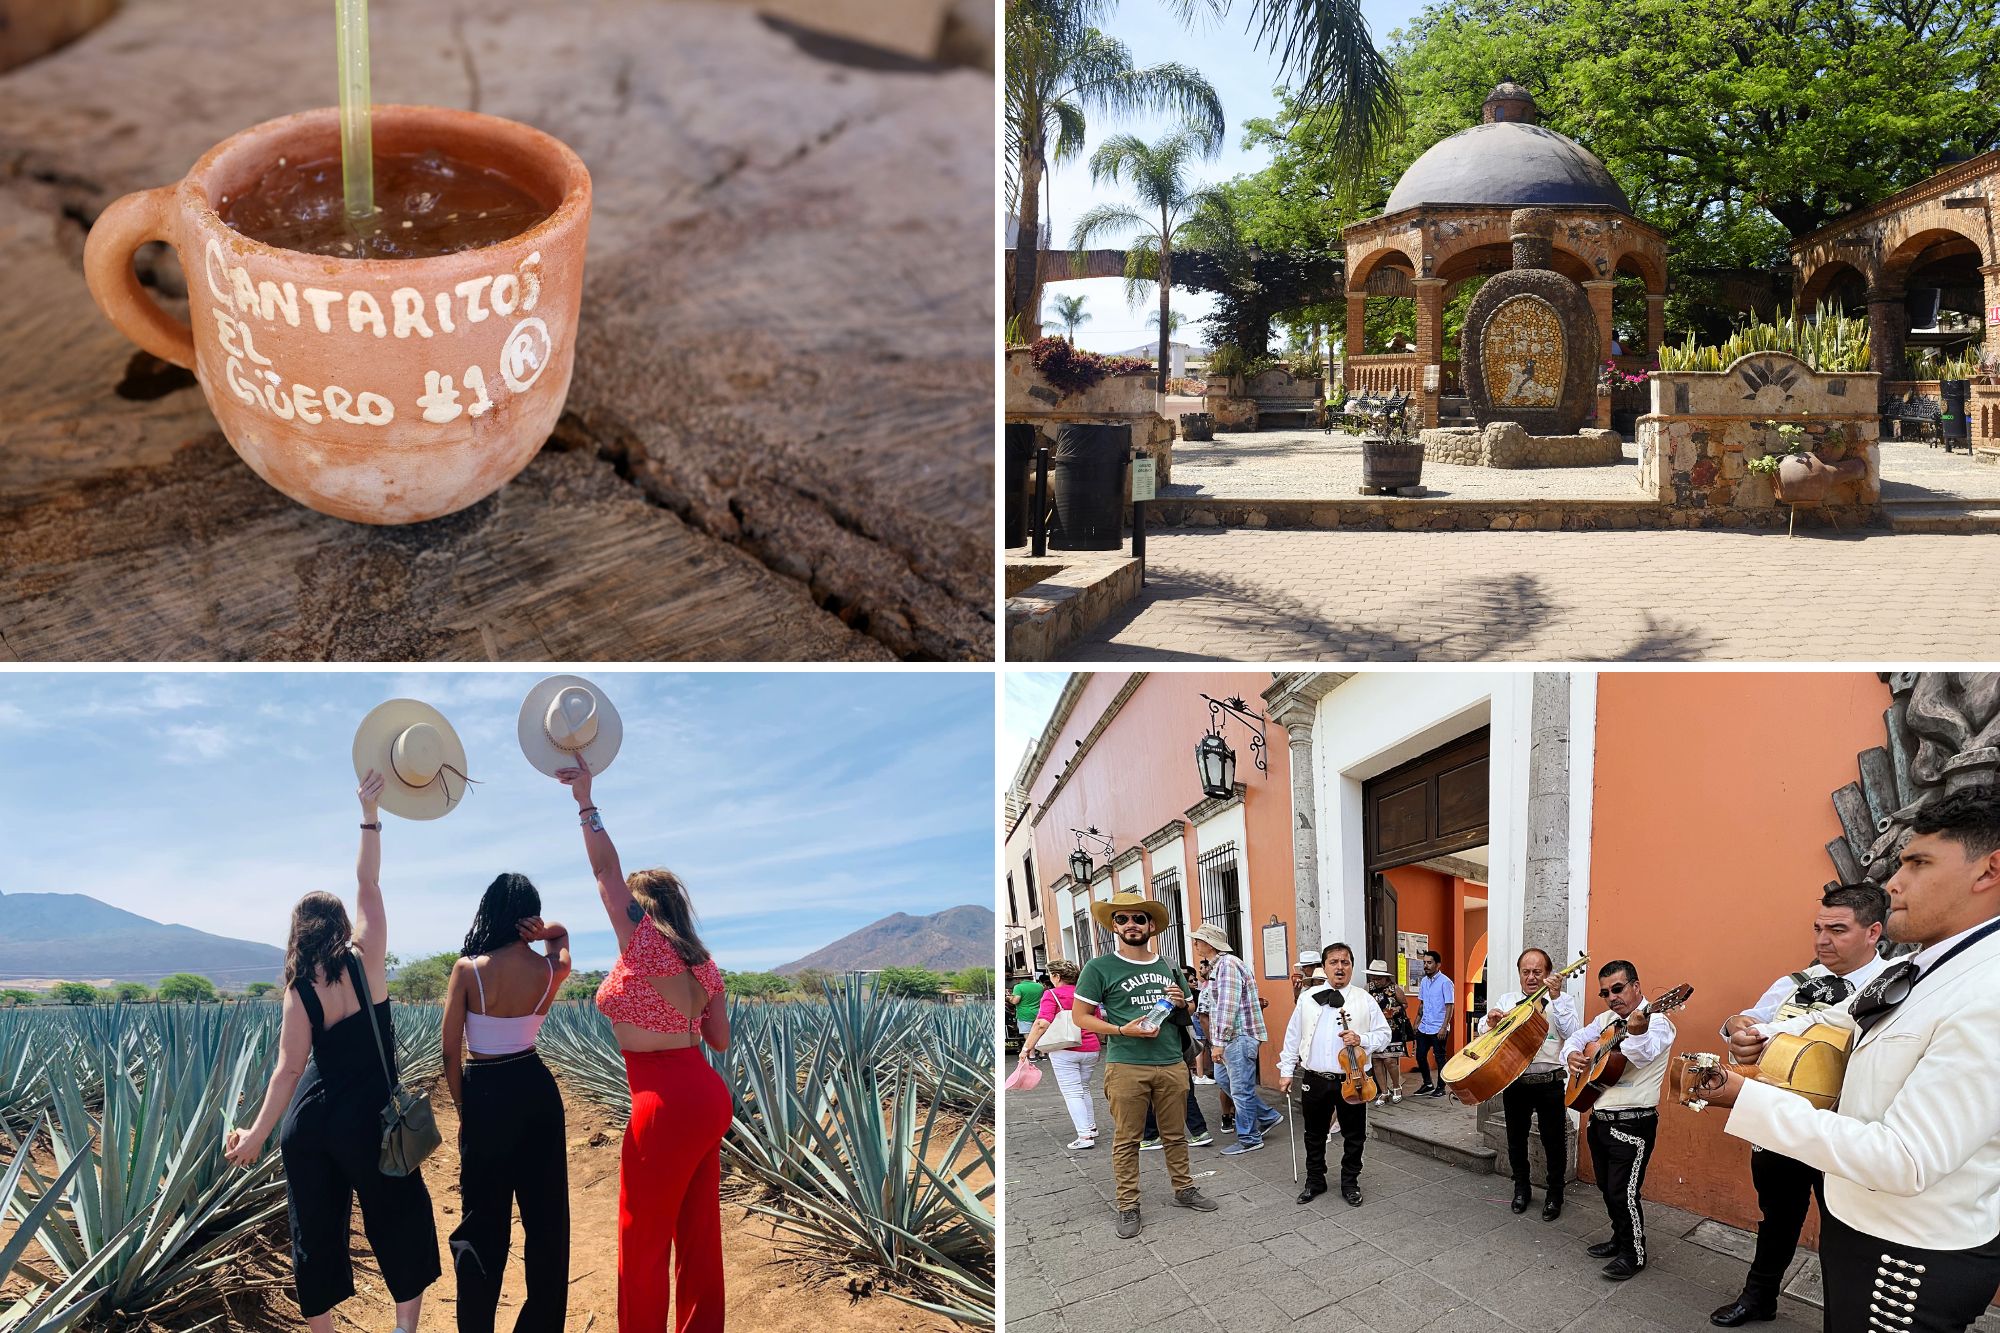 Collage of images from the Tequila tour